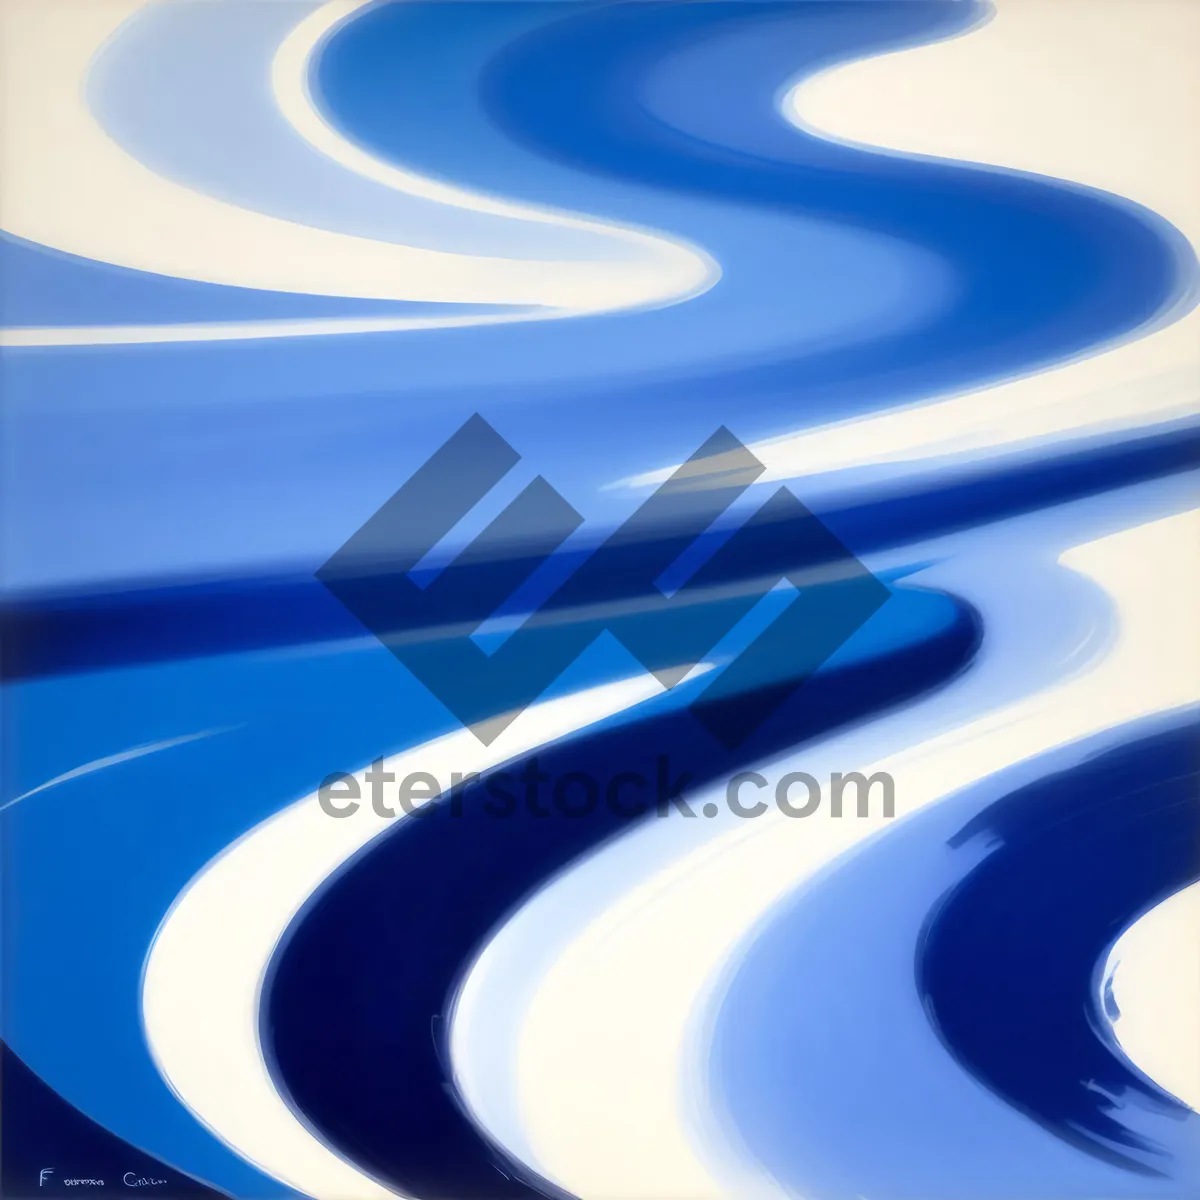 Picture of Shimmering Waves: Digital Art with Liquid Motion and Clean Hygienic Design